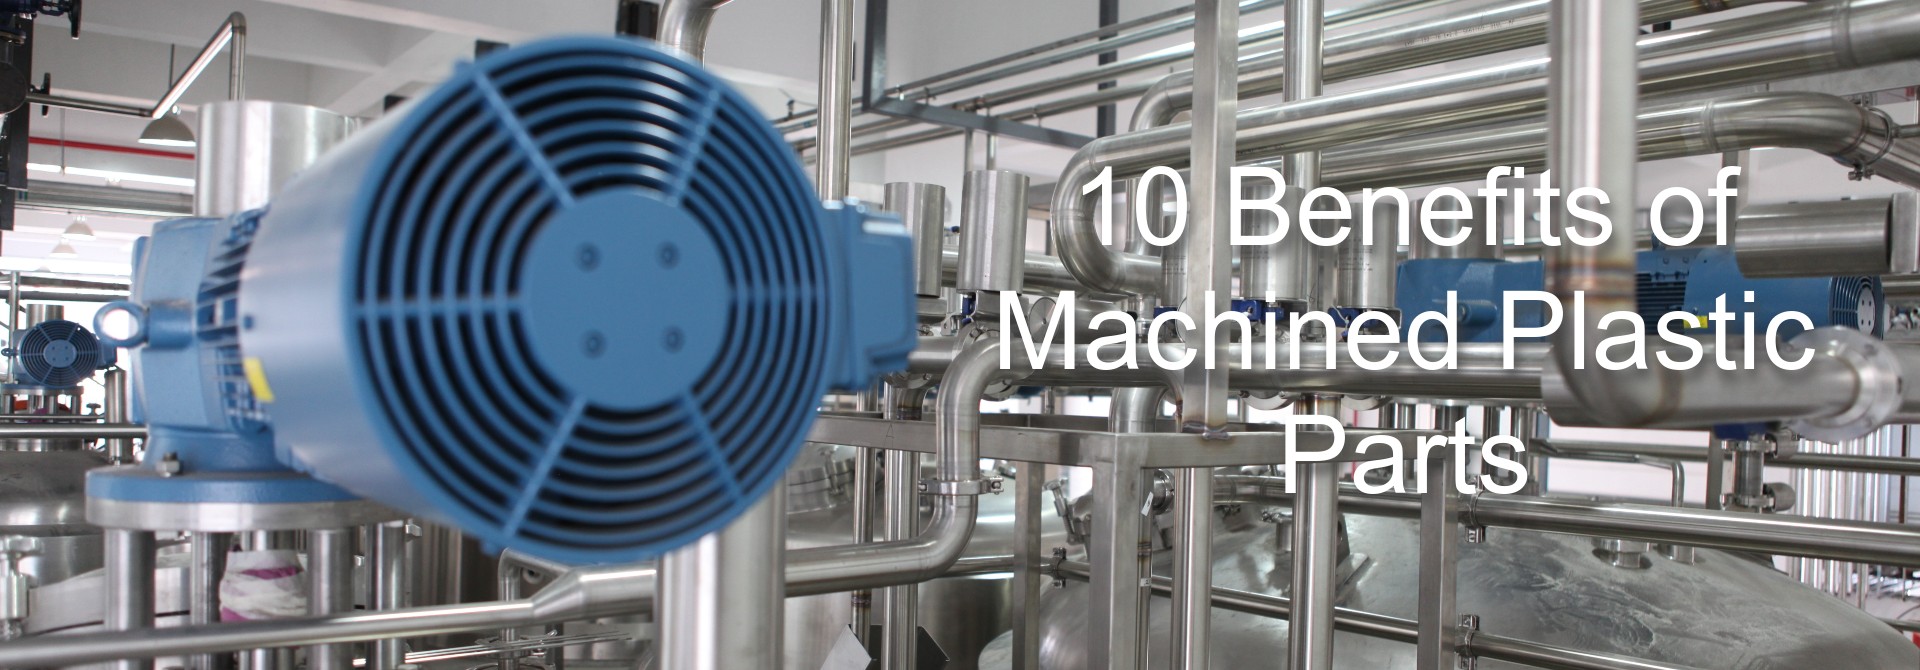 10 Benefits of Machined Plastic Parts